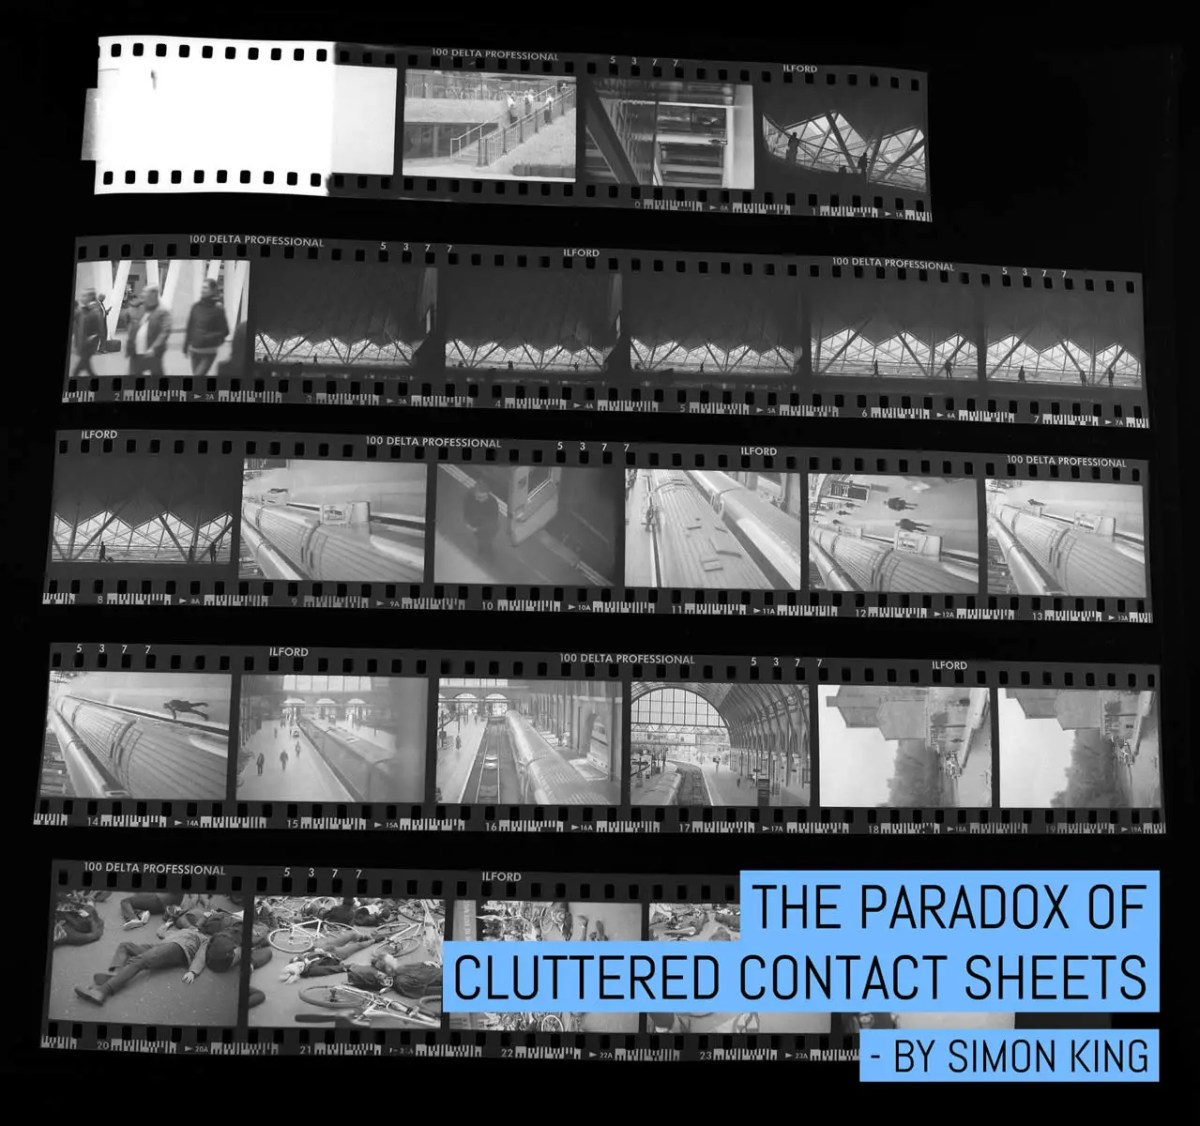 The Paradox of cluttered contact sheets - by Simon King